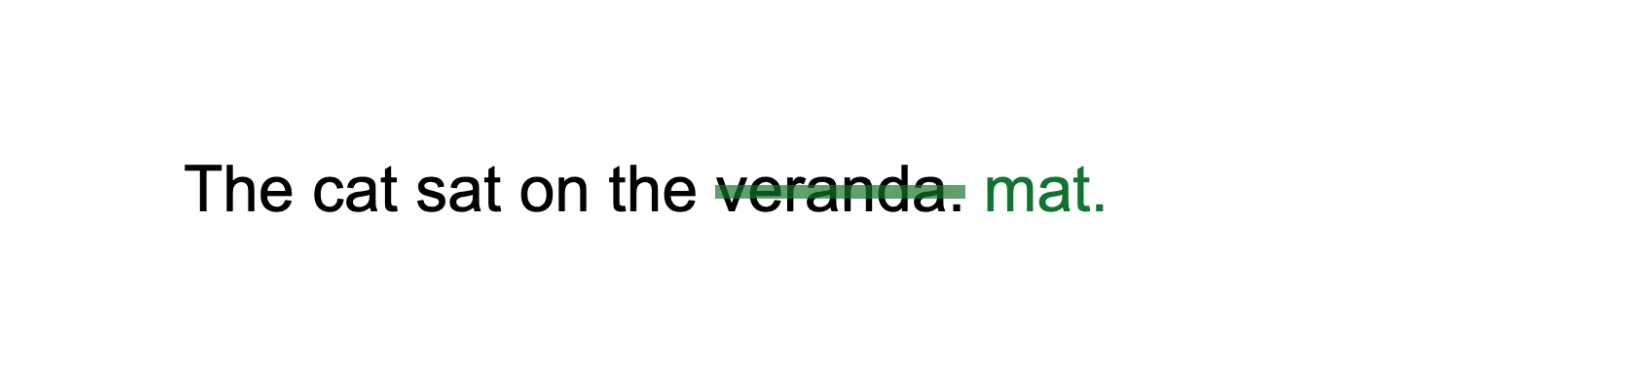 Text from a Google Doc. It reads "The cat sat on the veranda." The word veranda is crossed out, and the word mat is written alongside it, suggesting that the sentence should instead read: "The cat sat on the mat."